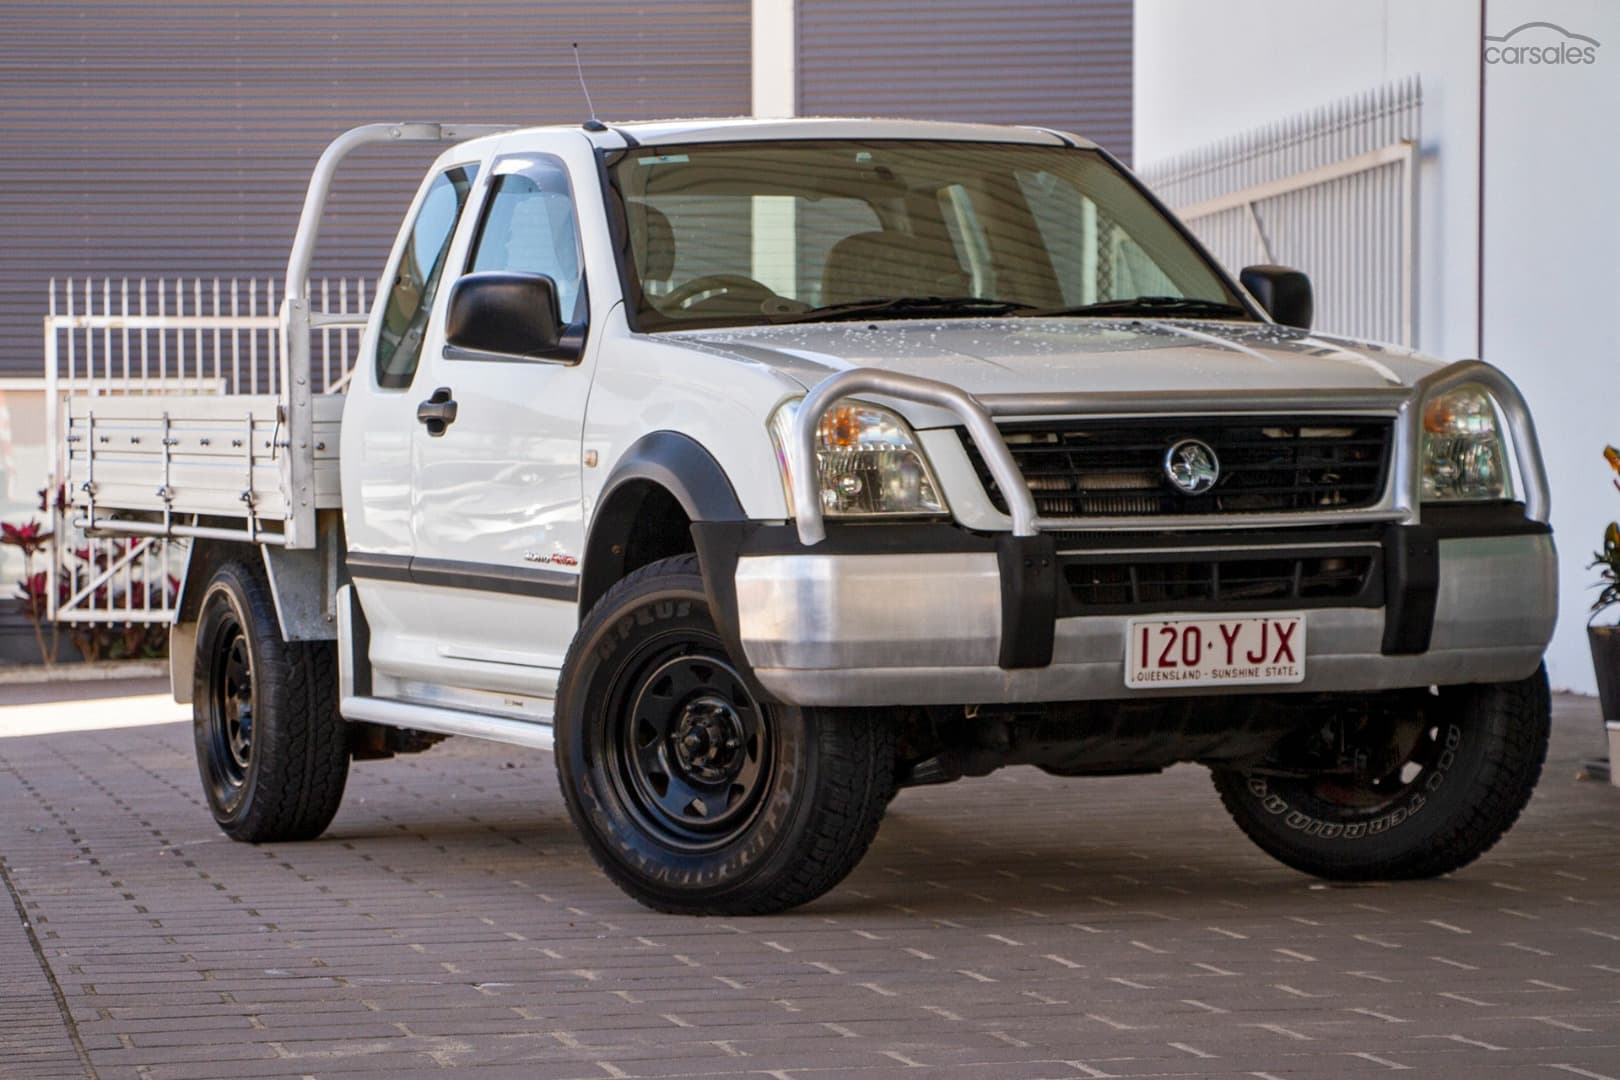 2006 Holden Rodeo Image 1